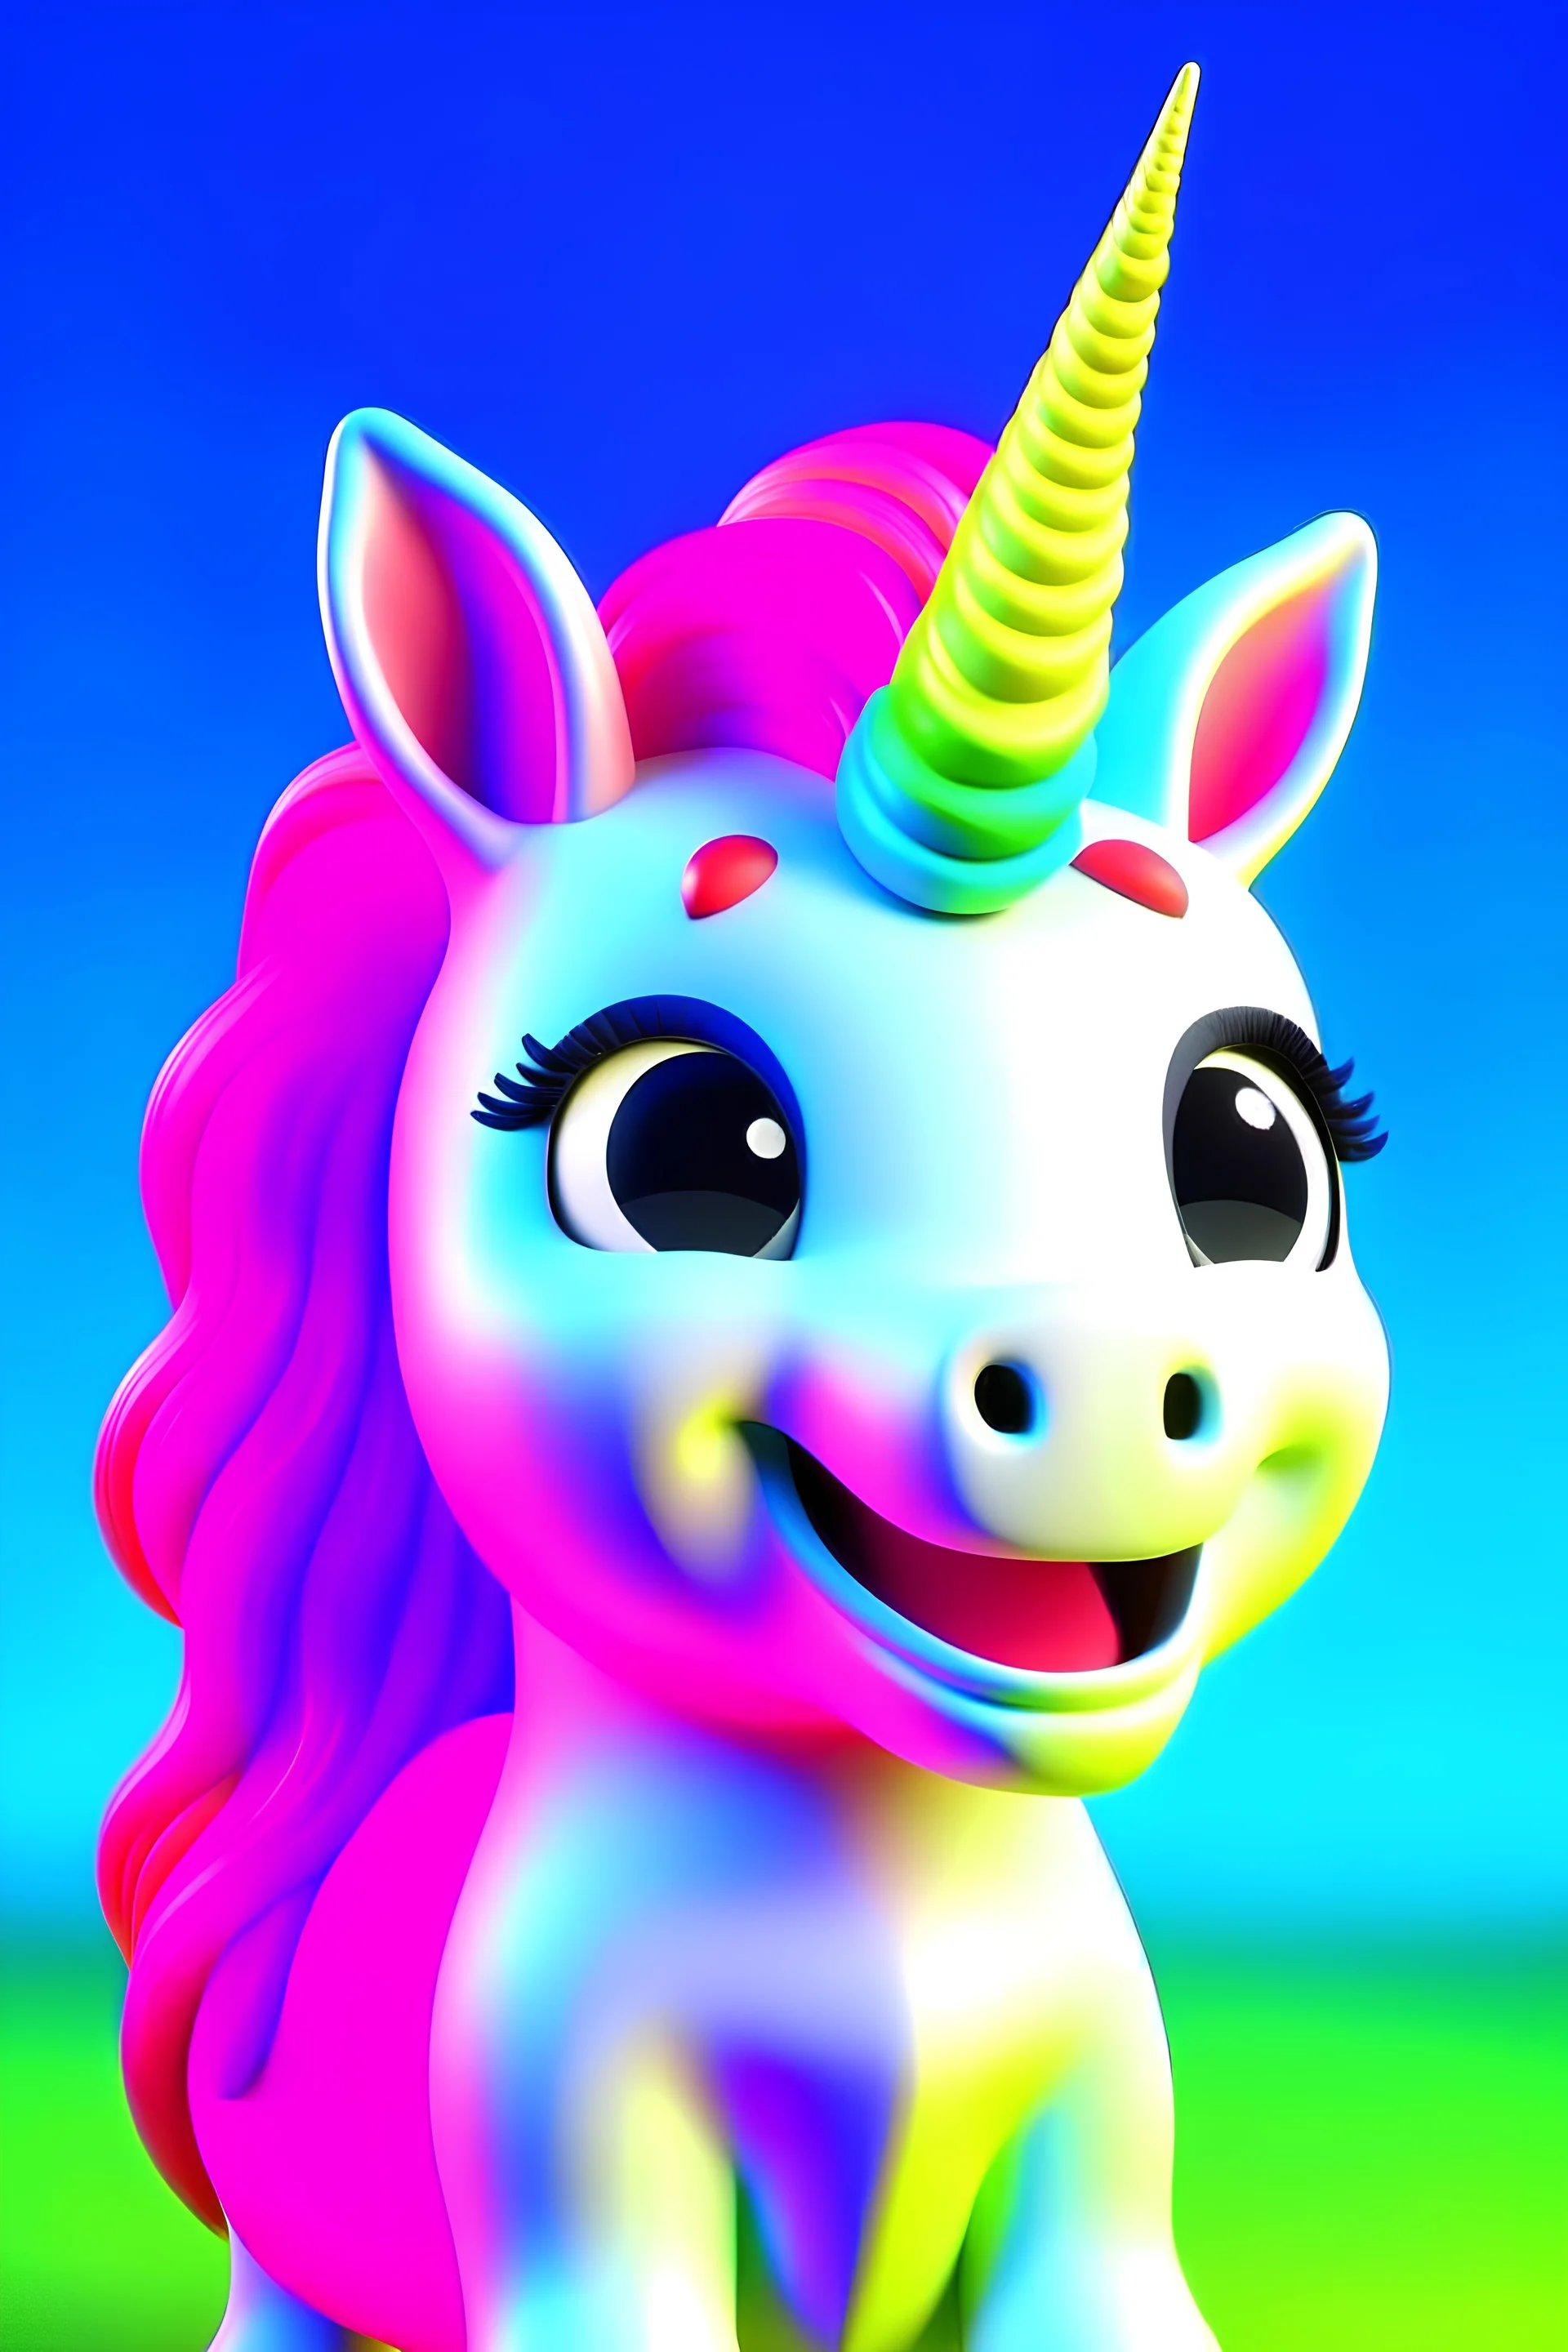 3d Cartoon, ultra quality. hyper realistic, low smiling, Pixar style, Rambow color background, highlight, details.4k, colorful, dreamy shiny background, cute baby unicorn.With long colored manes.